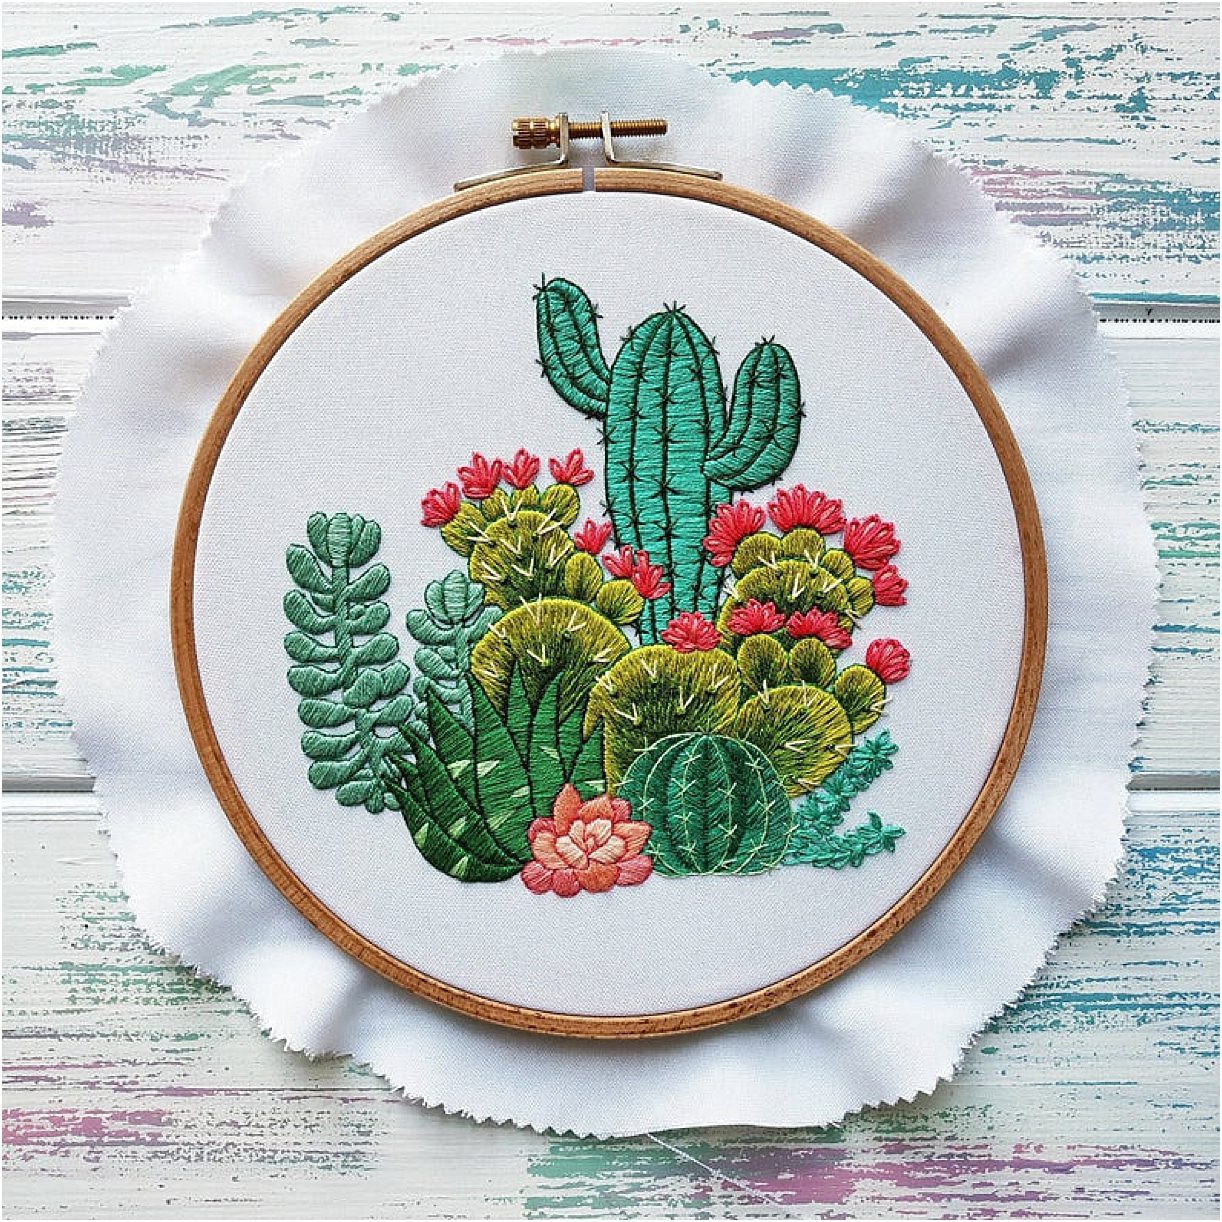 12 DIY Embroidery Designs for Your New Home | Hill City Bride Virginia Weddings Cacti